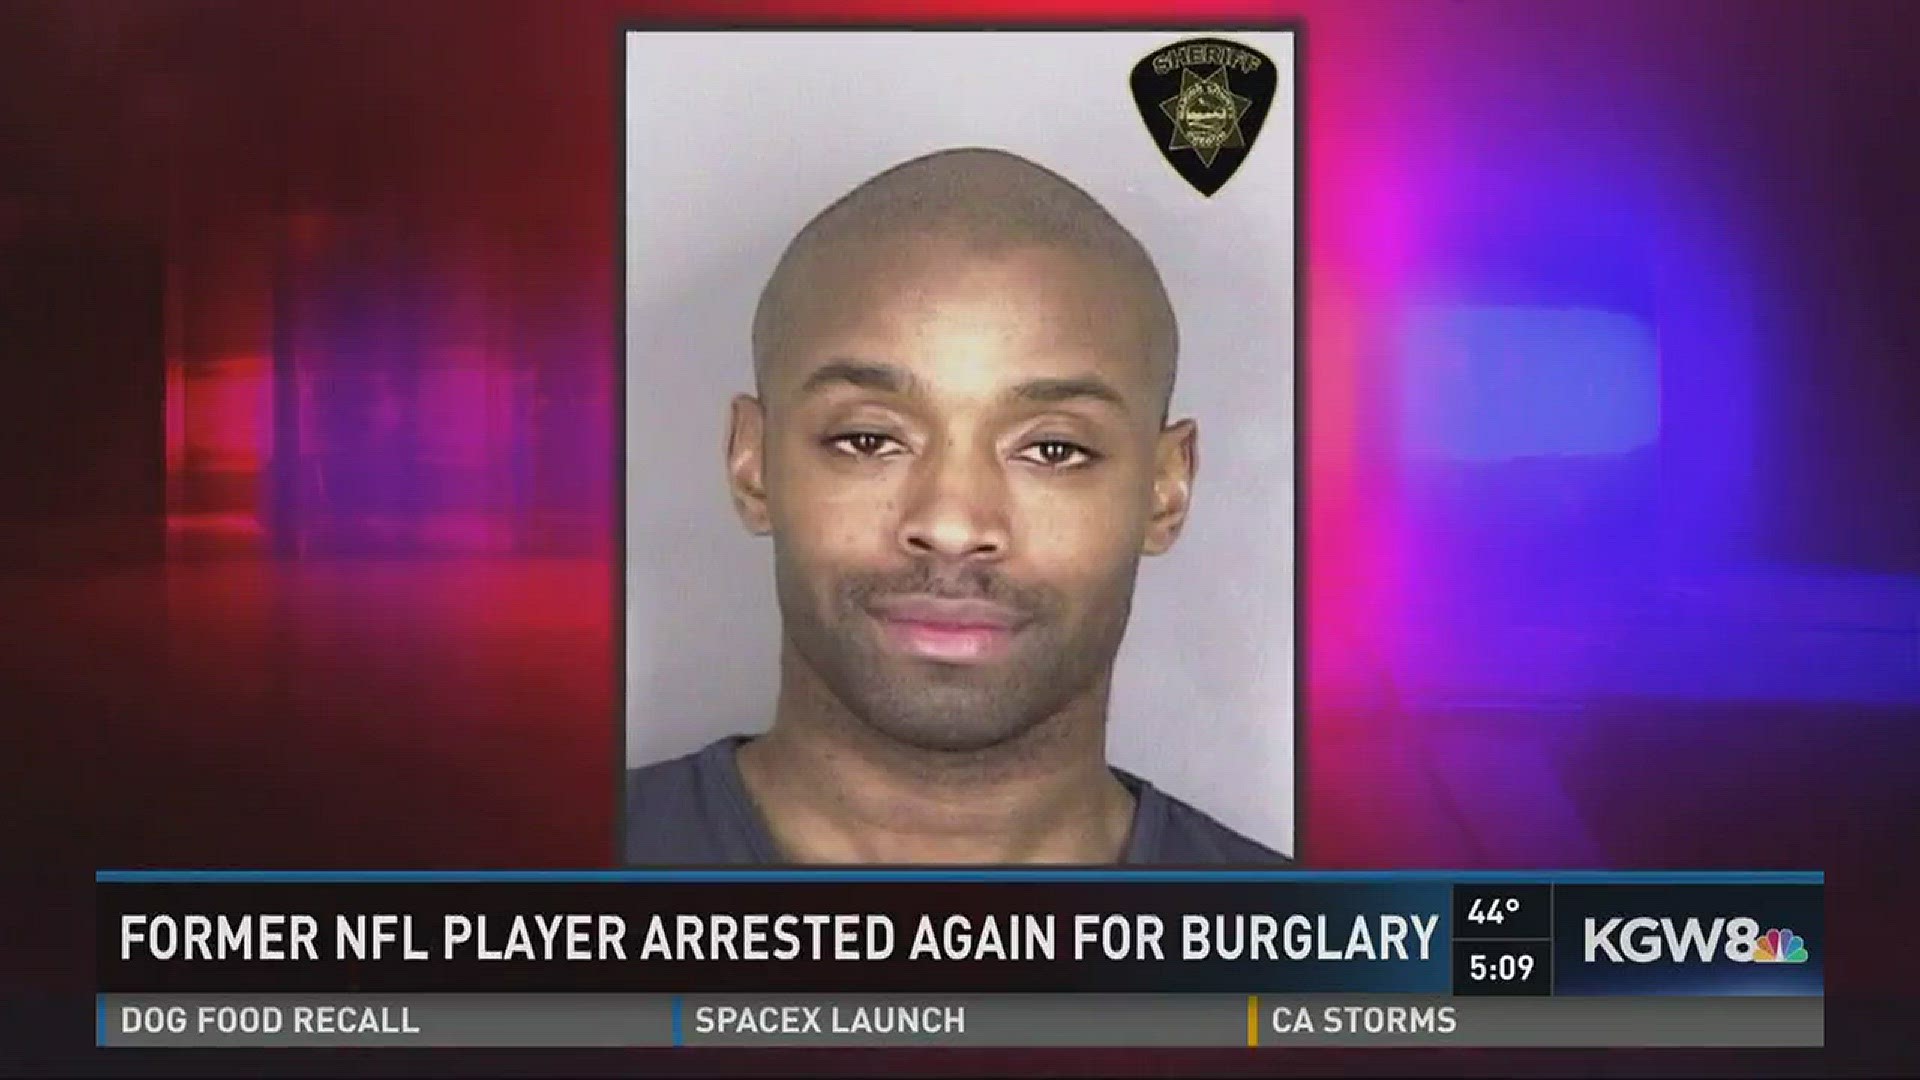 Former NFL player arrested again for burlary